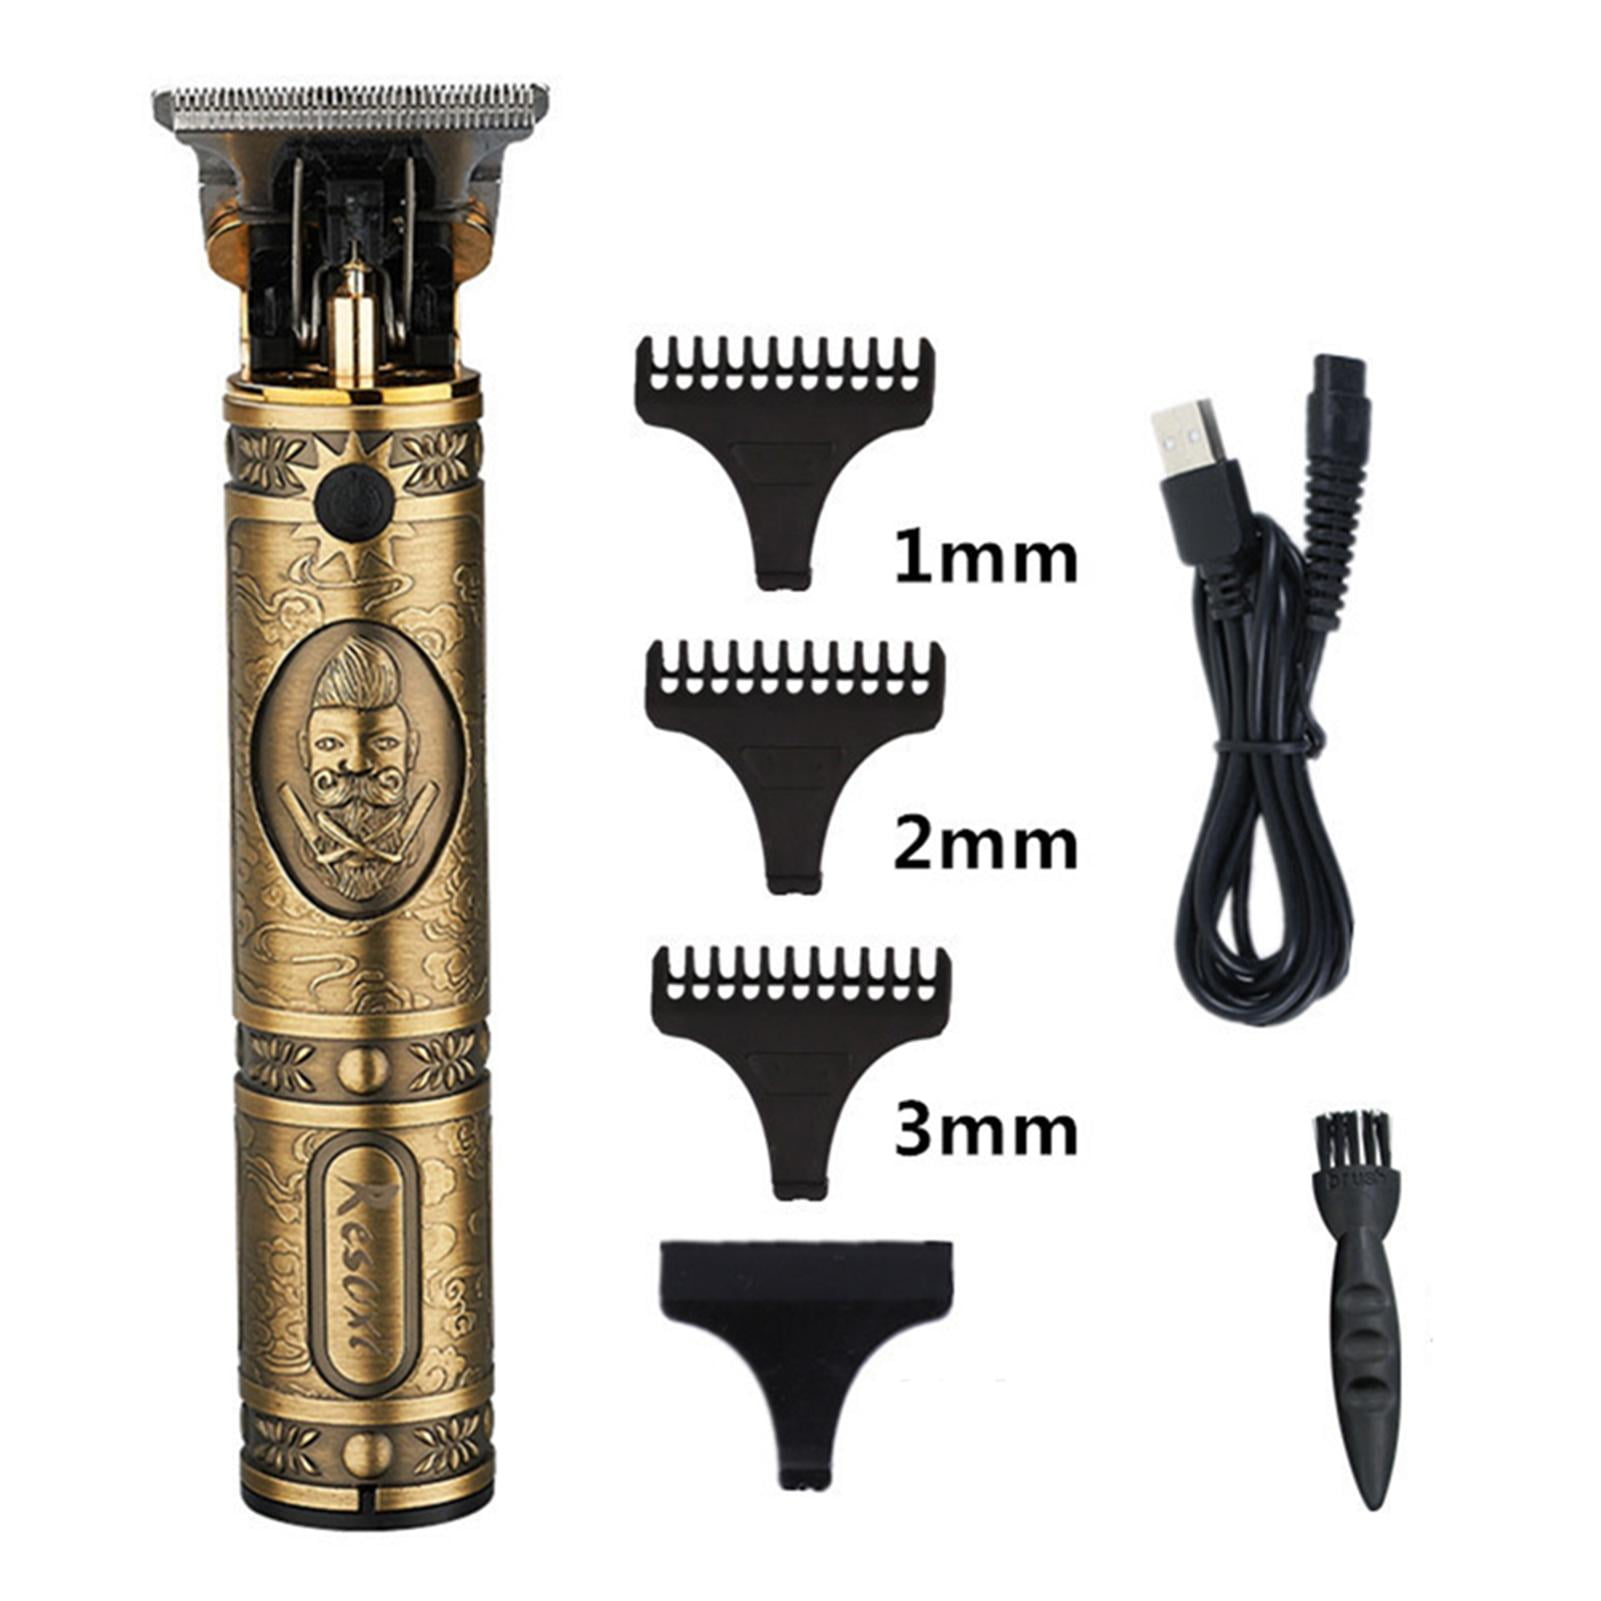 Carbon Fiber Hair Clipper Easy to Use Powerful Efficient Hair Trimmer for Beginners Professionals